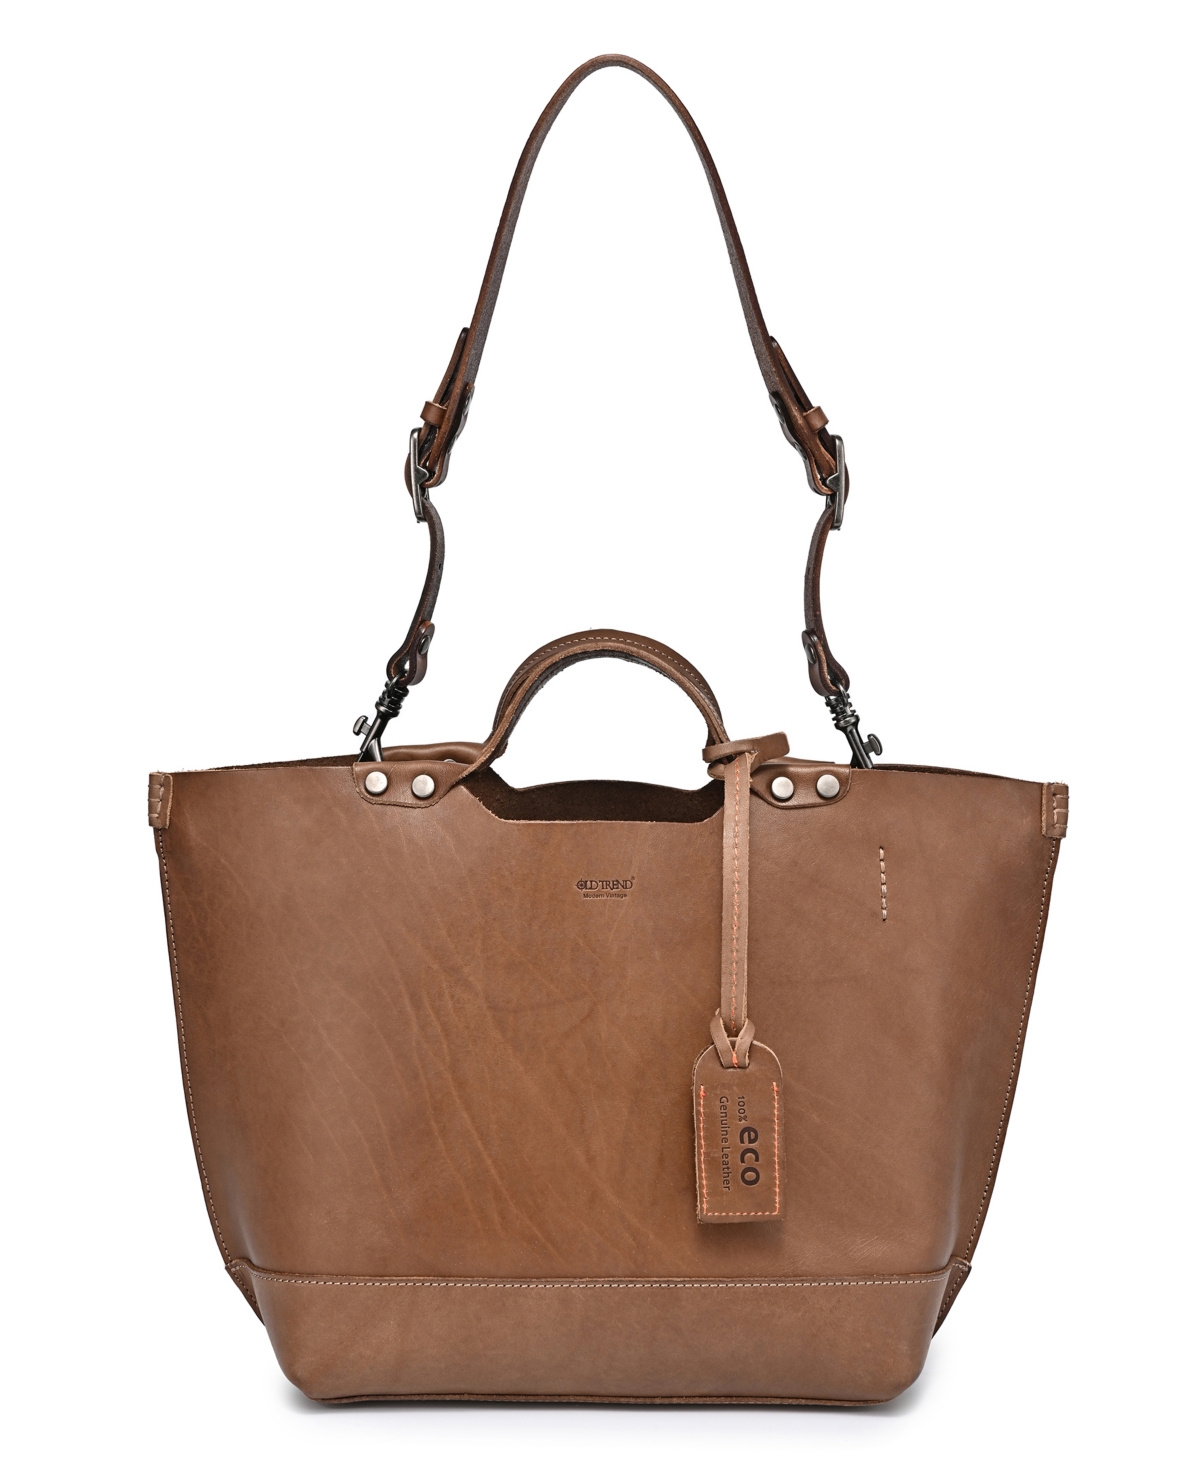 Women's Genuine Leather Gypsy Soul Tote Bag - Taupe